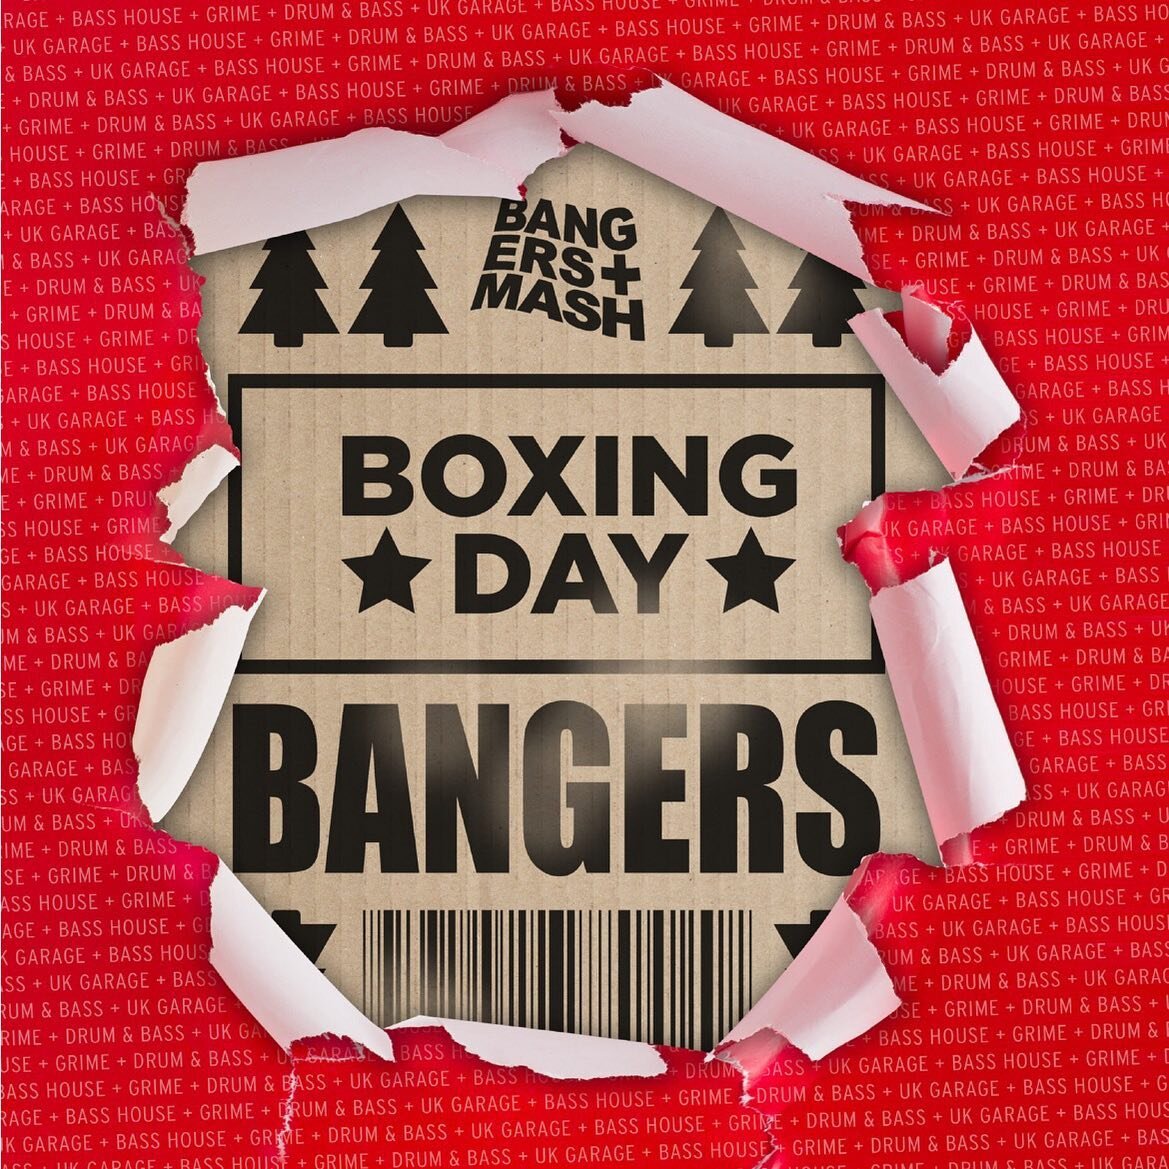 You know the drill, the UK boys are bringing the flavours of the underground to @garfinkelswhistler on Boxing Day! Join @edwindropsbangers, @ollywattdj &amp; myself as we morph into the @wedropbangers cru! 

Doors are at 8 and you dun know it&rsquo;s